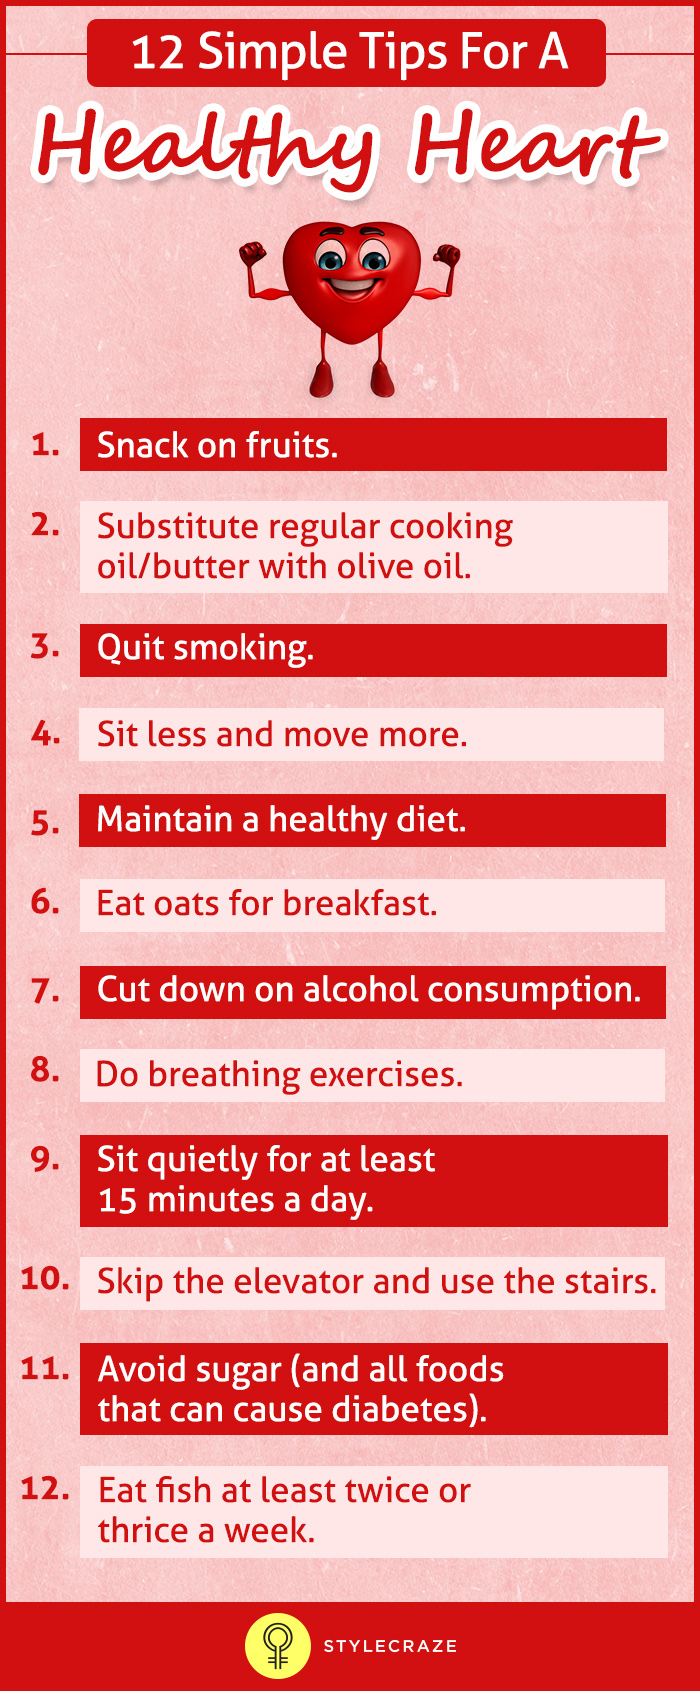 12-Simple-Tips-For-A-Healthy-Heart